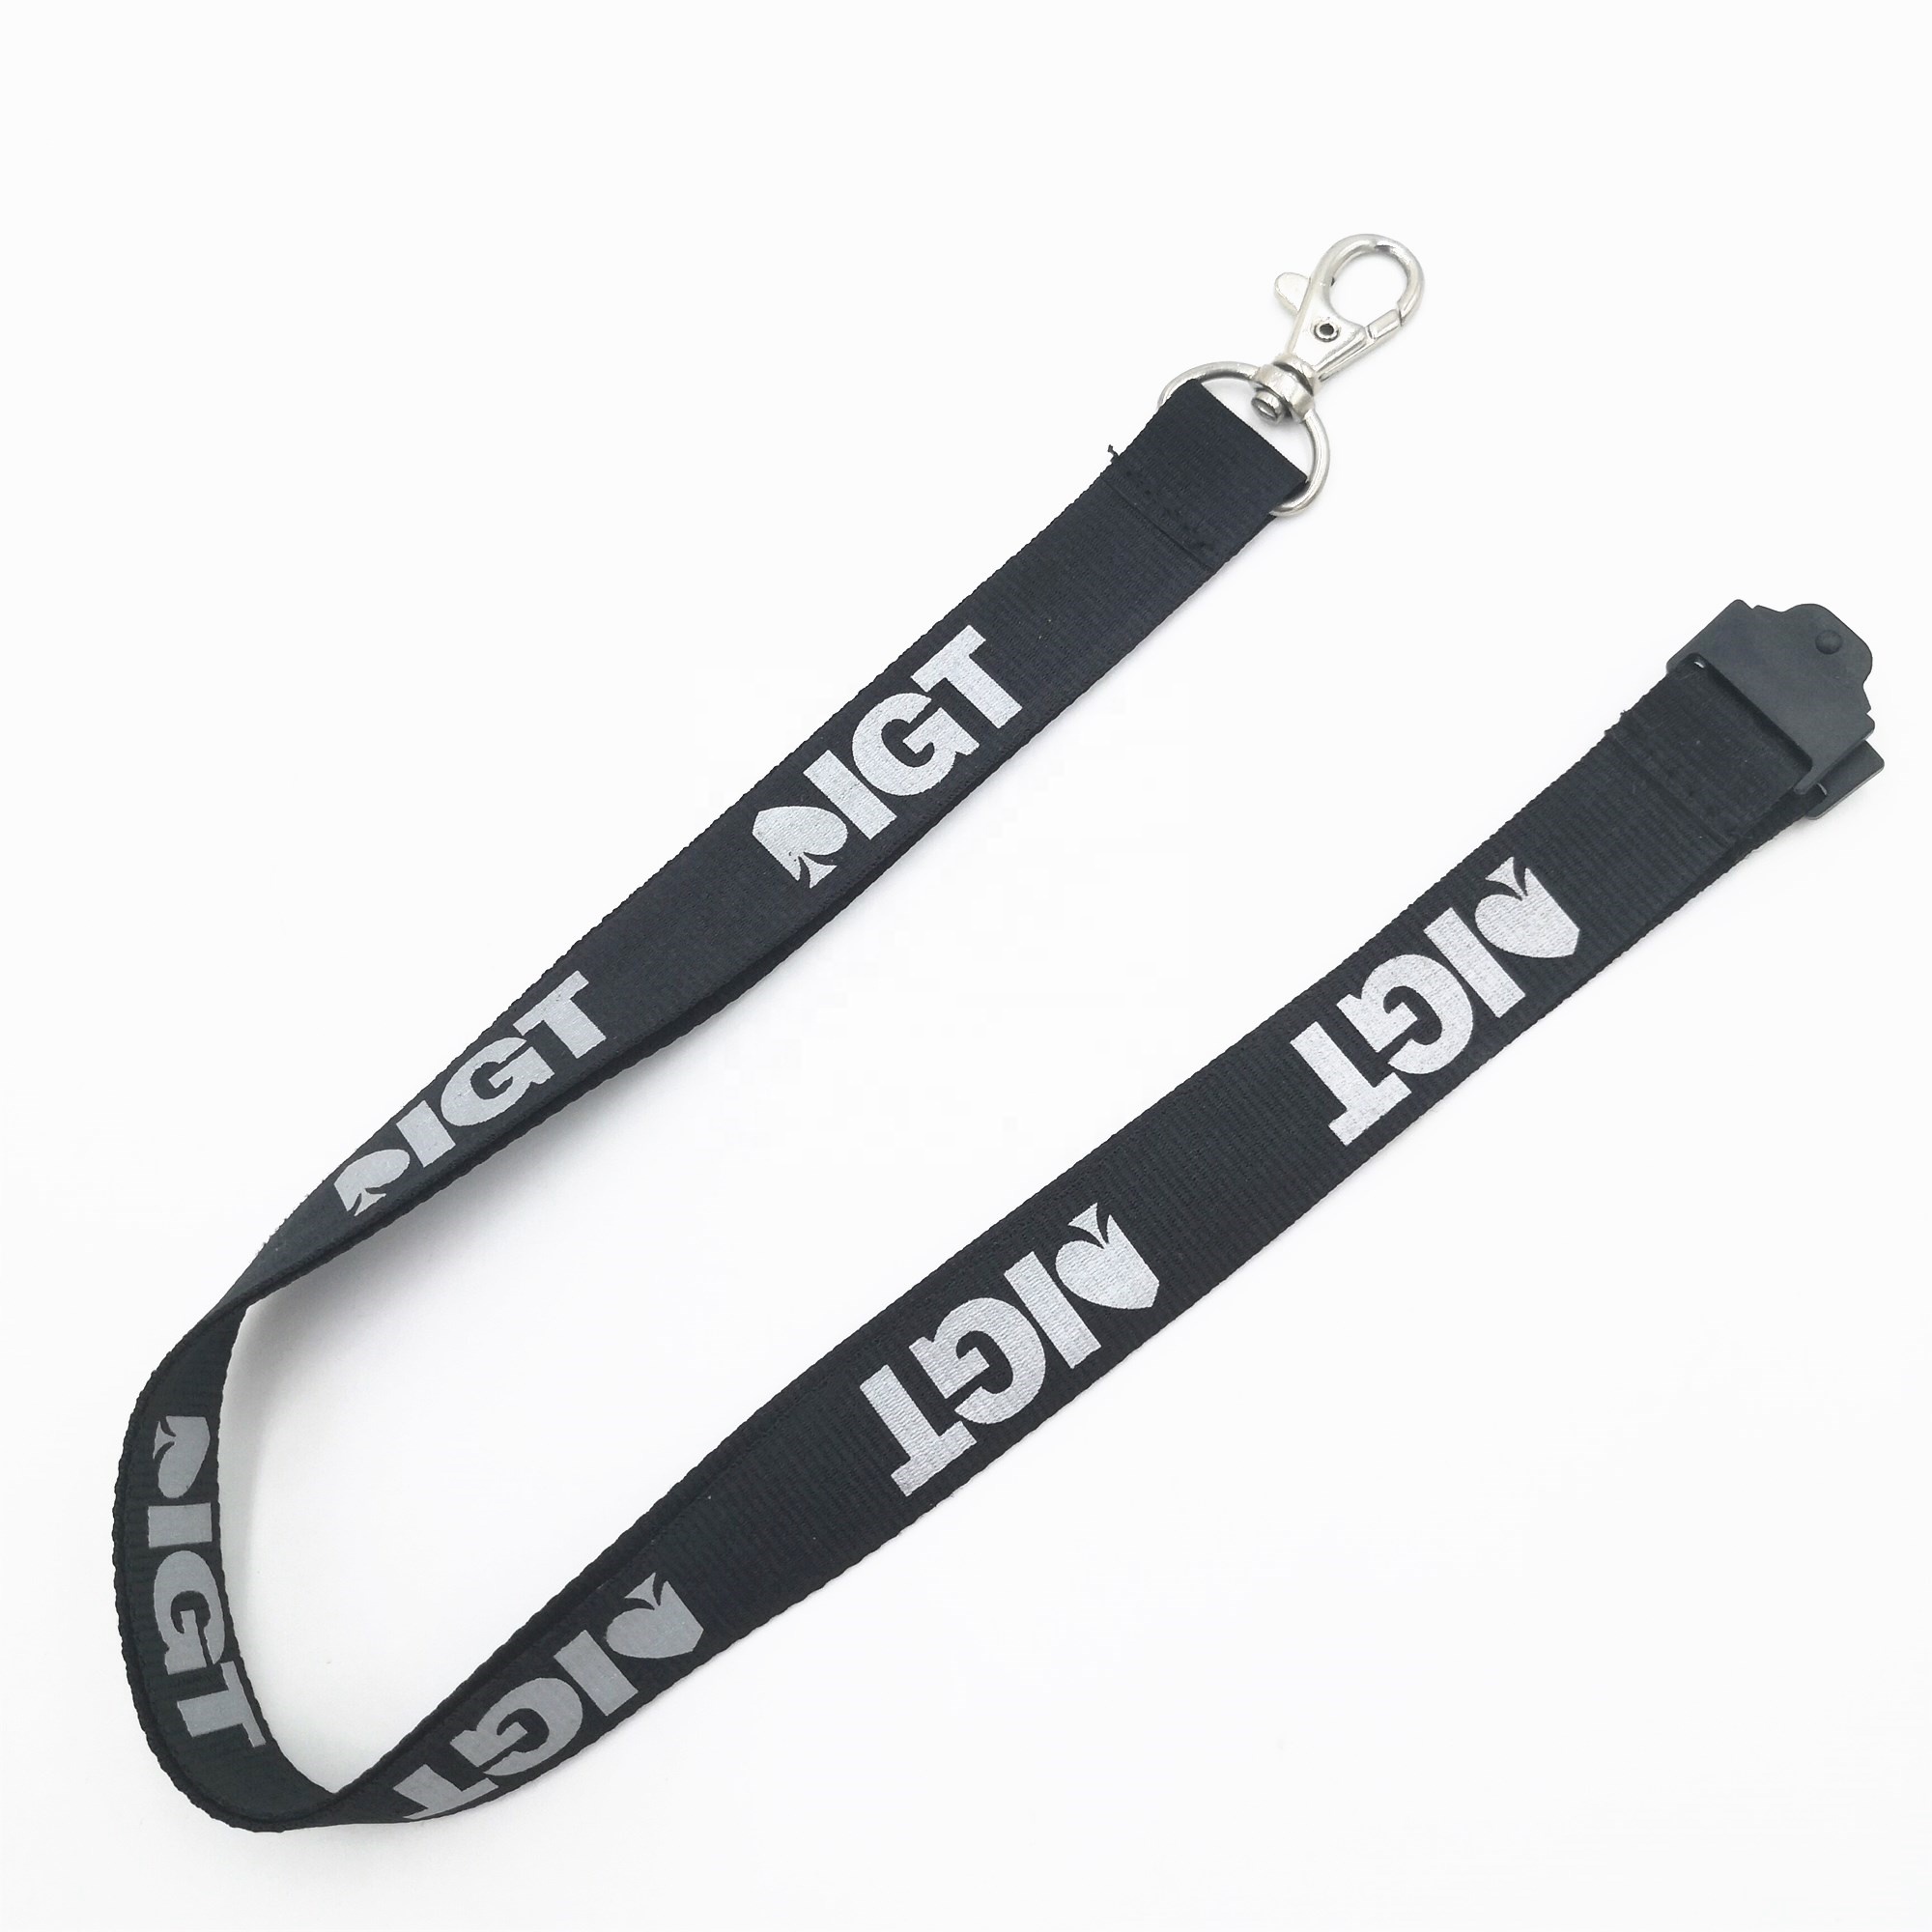 China Cheap price Sublimation Printing Lanyard – Good quality custom polyester material silk printing safety buckle lanyard with interesting pattern – Bison